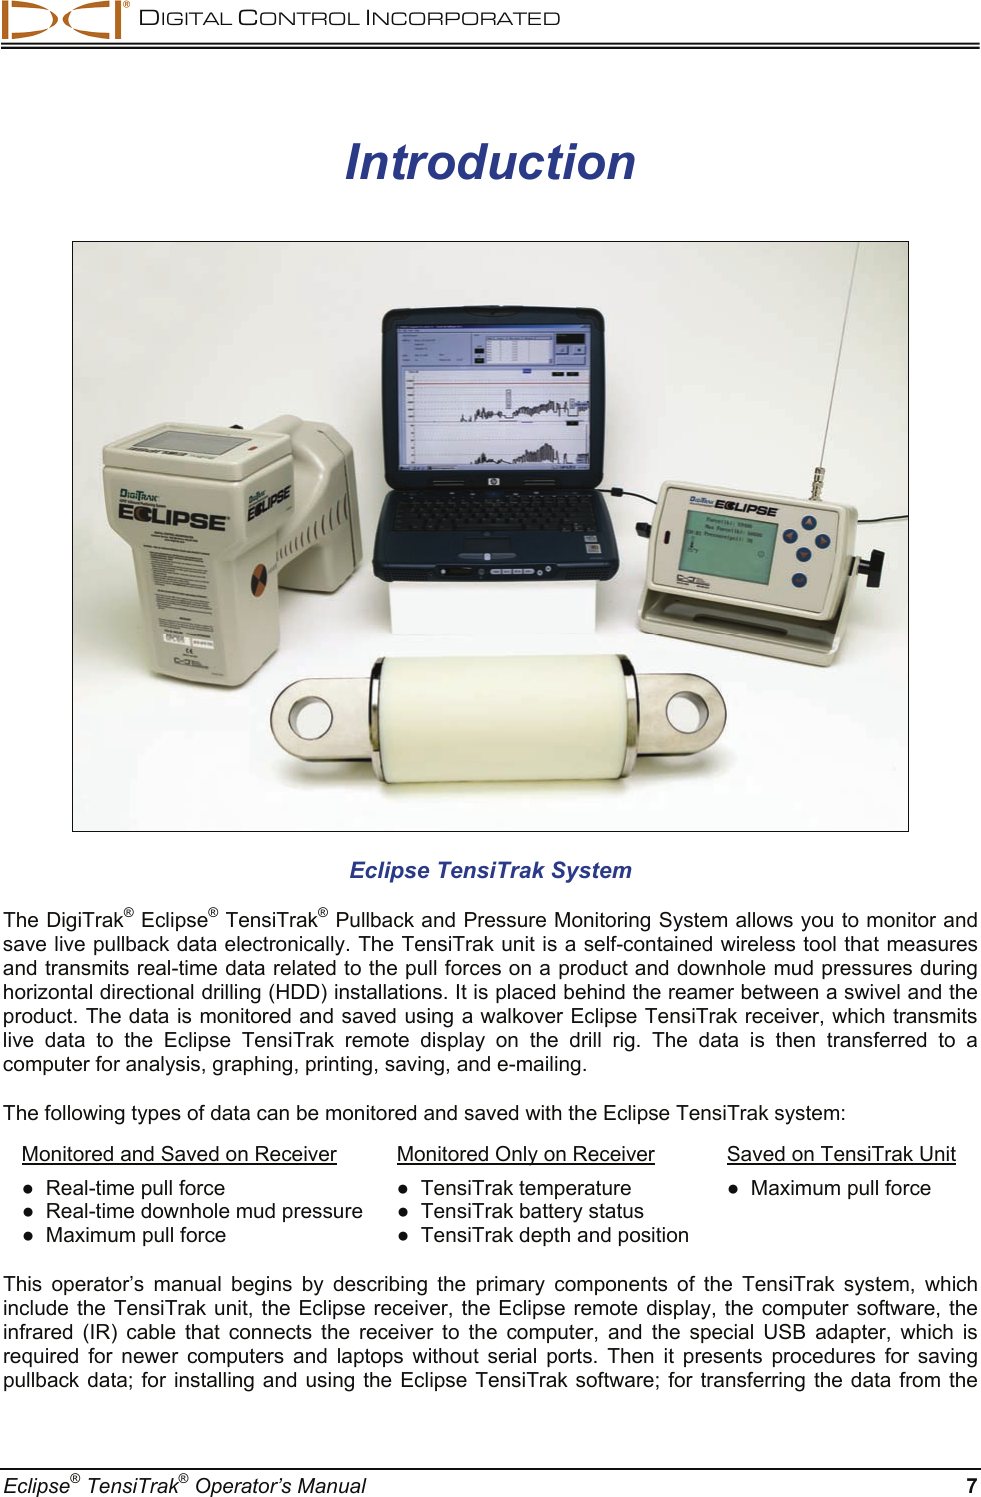  DIGITAL CONTROL INCORPORATED  Eclipse® TensiTrak® Operator’s Manual  7 Introduction  Eclipse TensiTrak System  The DigiTrak® Eclipse® TensiTrak® Pullback and Pressure Monitoring System allows you to monitor and save live pullback data electronically. The TensiTrak unit is a self-contained wireless tool that measures and transmits real-time data related to the pull forces on a product and downhole mud pressures during horizontal directional drilling (HDD) installations. It is placed behind the reamer between a swivel and the product. The data is monitored and saved using a walkover Eclipse TensiTrak receiver, which transmits live data to the Eclipse TensiTrak remote display on the drill rig. The data is then transferred to a computer for analysis, graphing, printing, saving, and e-mailing.  The following types of data can be monitored and saved with the Eclipse TensiTrak system:  Monitored and Saved on Receiver  Monitored Only on Receiver  Saved on TensiTrak Unit ●  Real-time pull force   ●  TensiTrak temperature  ●  Maximum pull force ●  Real-time downhole mud pressure  ●  TensiTrak battery status   ●  Maximum pull force   ●  TensiTrak depth and position   This operator’s manual begins by describing the primary components of the TensiTrak system, which include the TensiTrak unit, the Eclipse receiver, the Eclipse remote display, the computer software, the infrared (IR) cable that connects the receiver to the computer, and the special USB adapter, which is required for newer computers and laptops without serial ports. Then it presents procedures for saving pullback data; for installing and using the Eclipse TensiTrak software; for transferring the data from the 